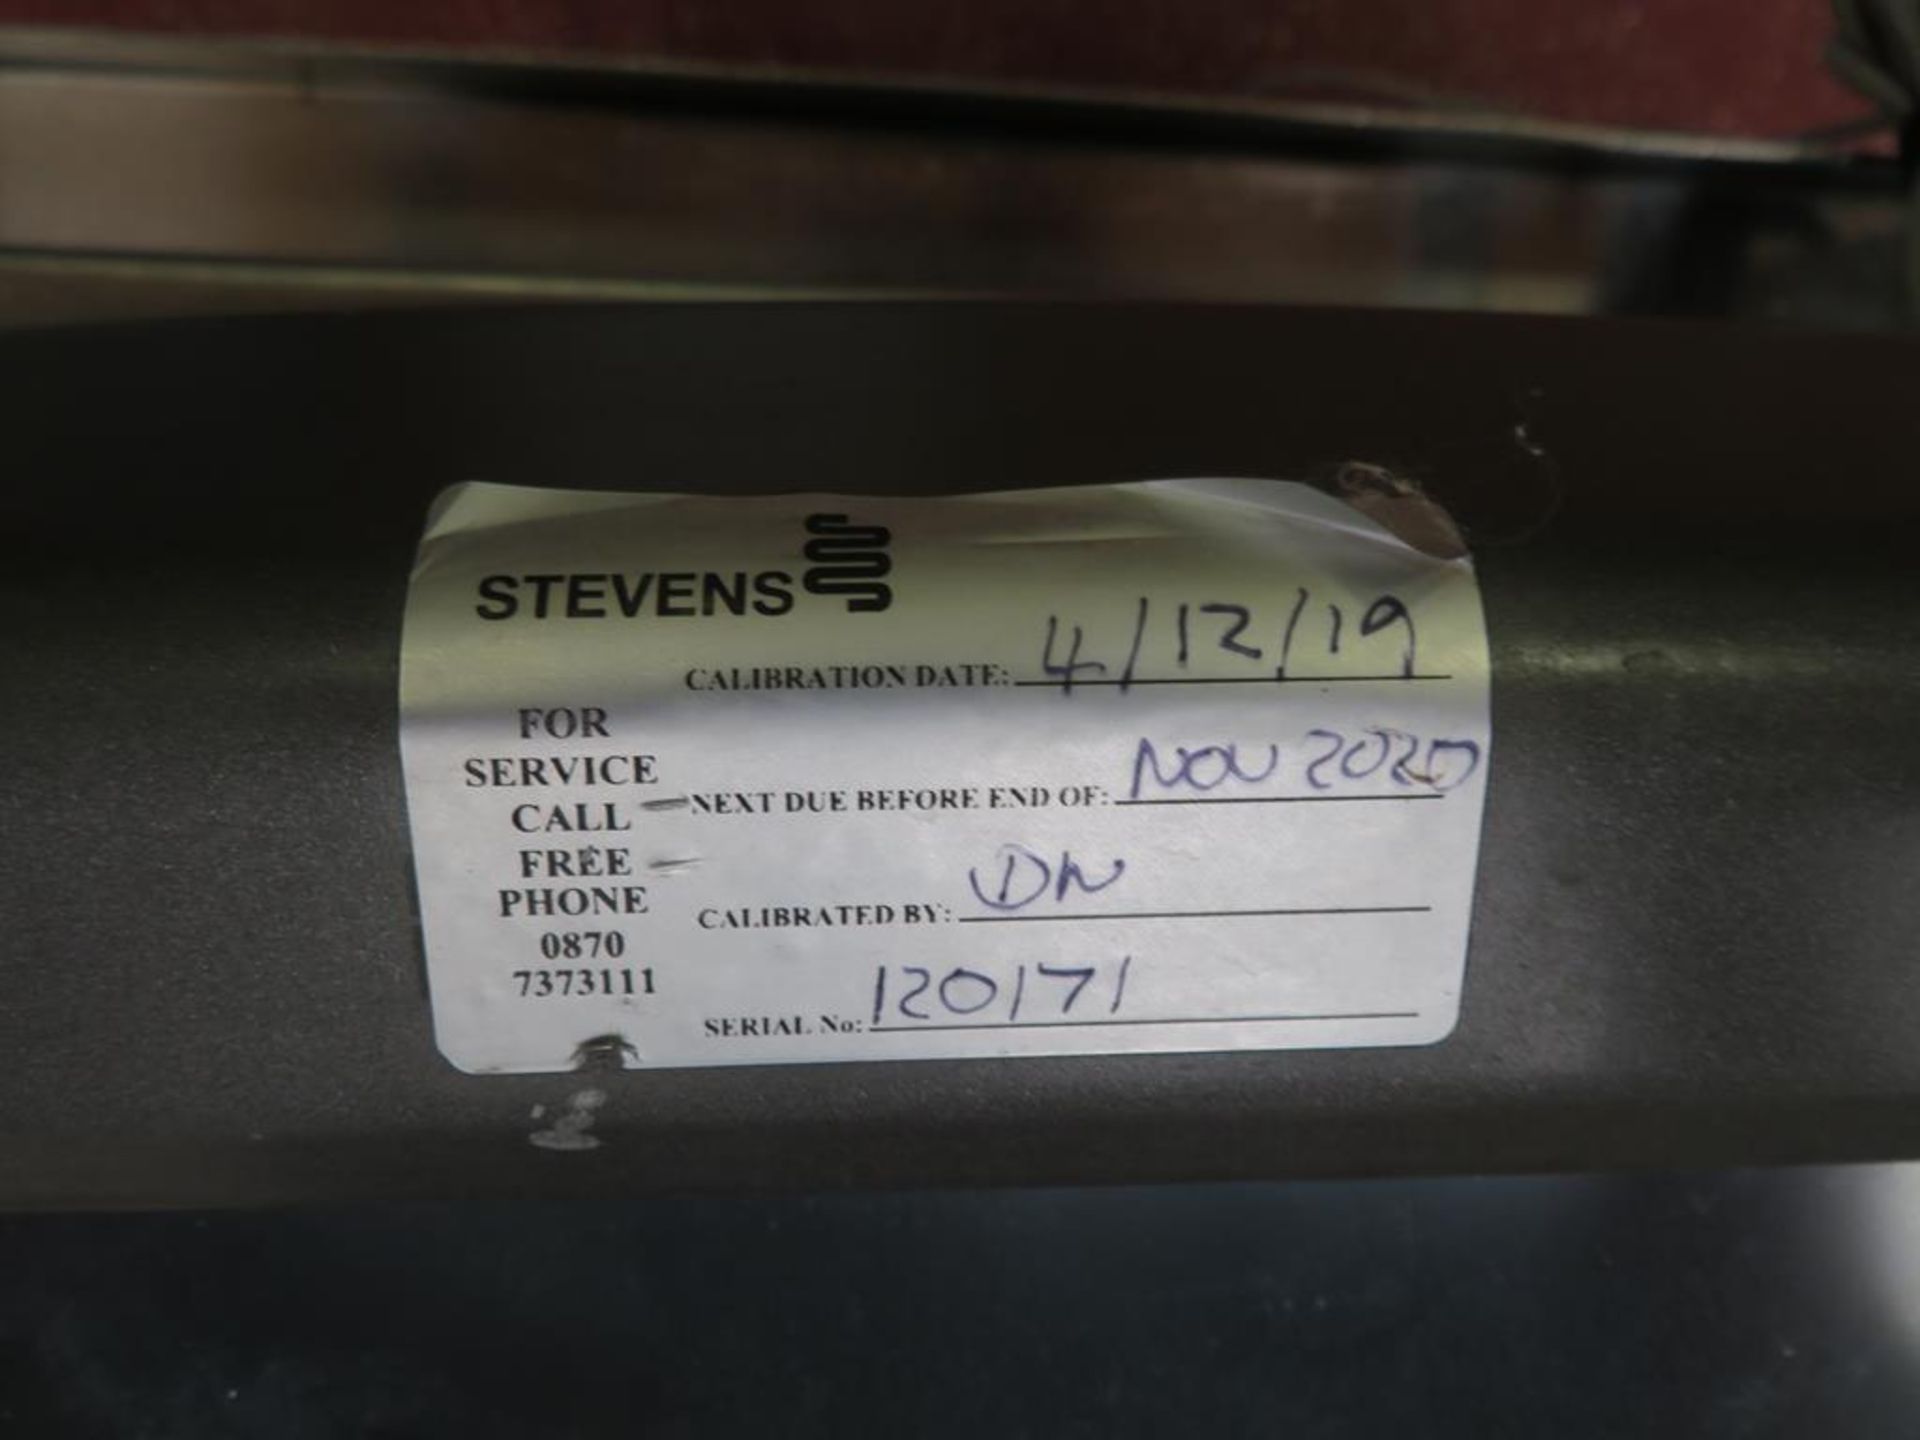 2 x Stainless Steel Weighing Platforms, Stevens DRP3000i Digital Read Out etc - Image 3 of 7